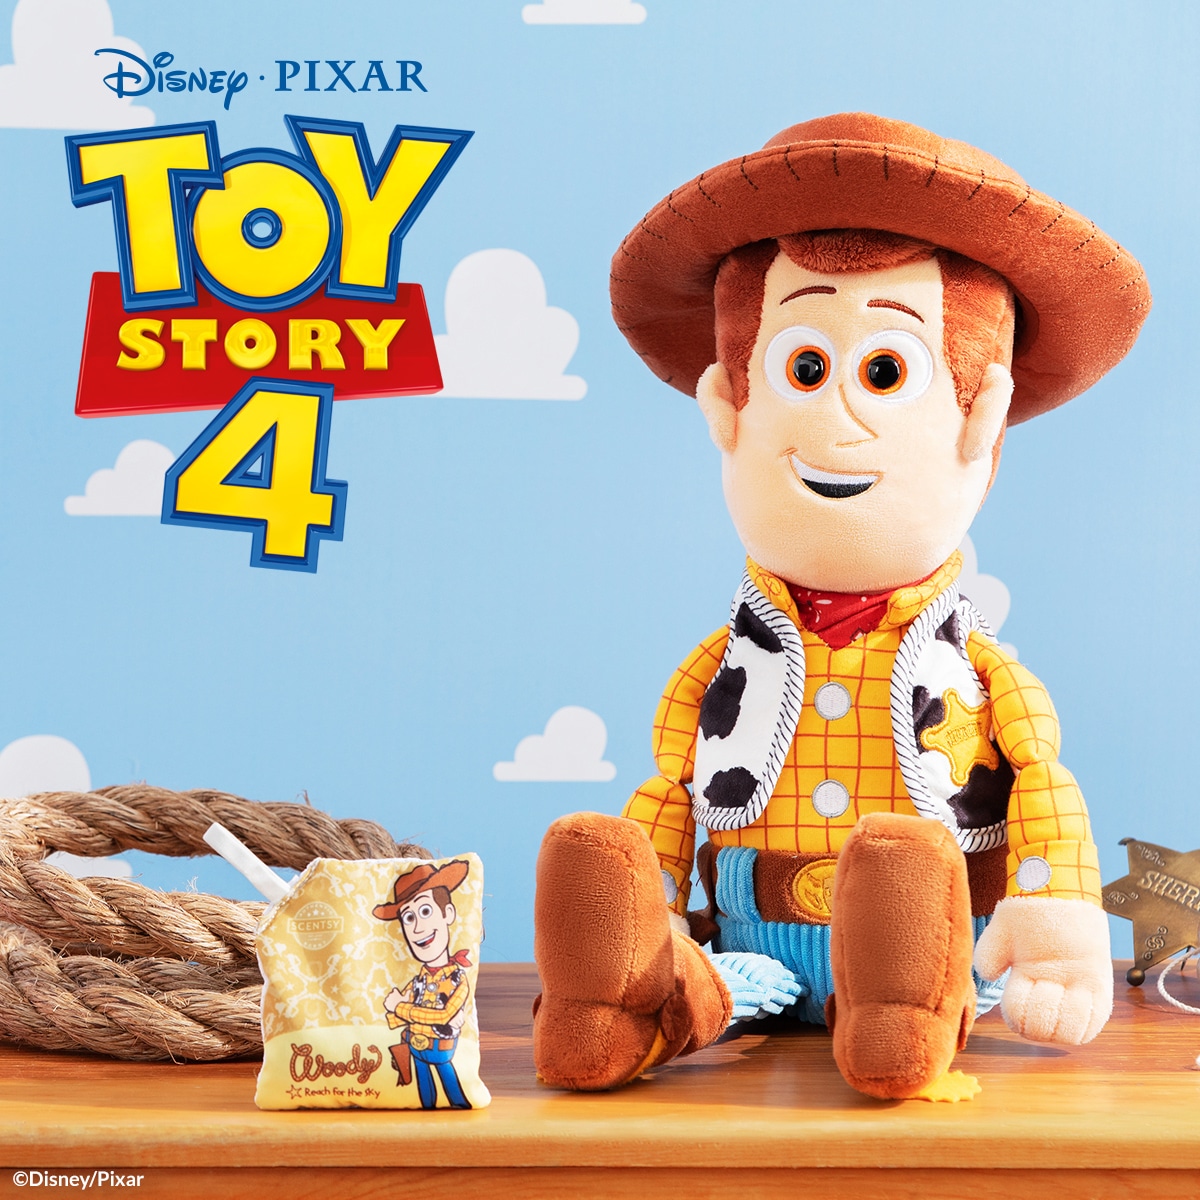 Woody and Buzz Lightyear 'will return for Toy Story 5' - Wales Online